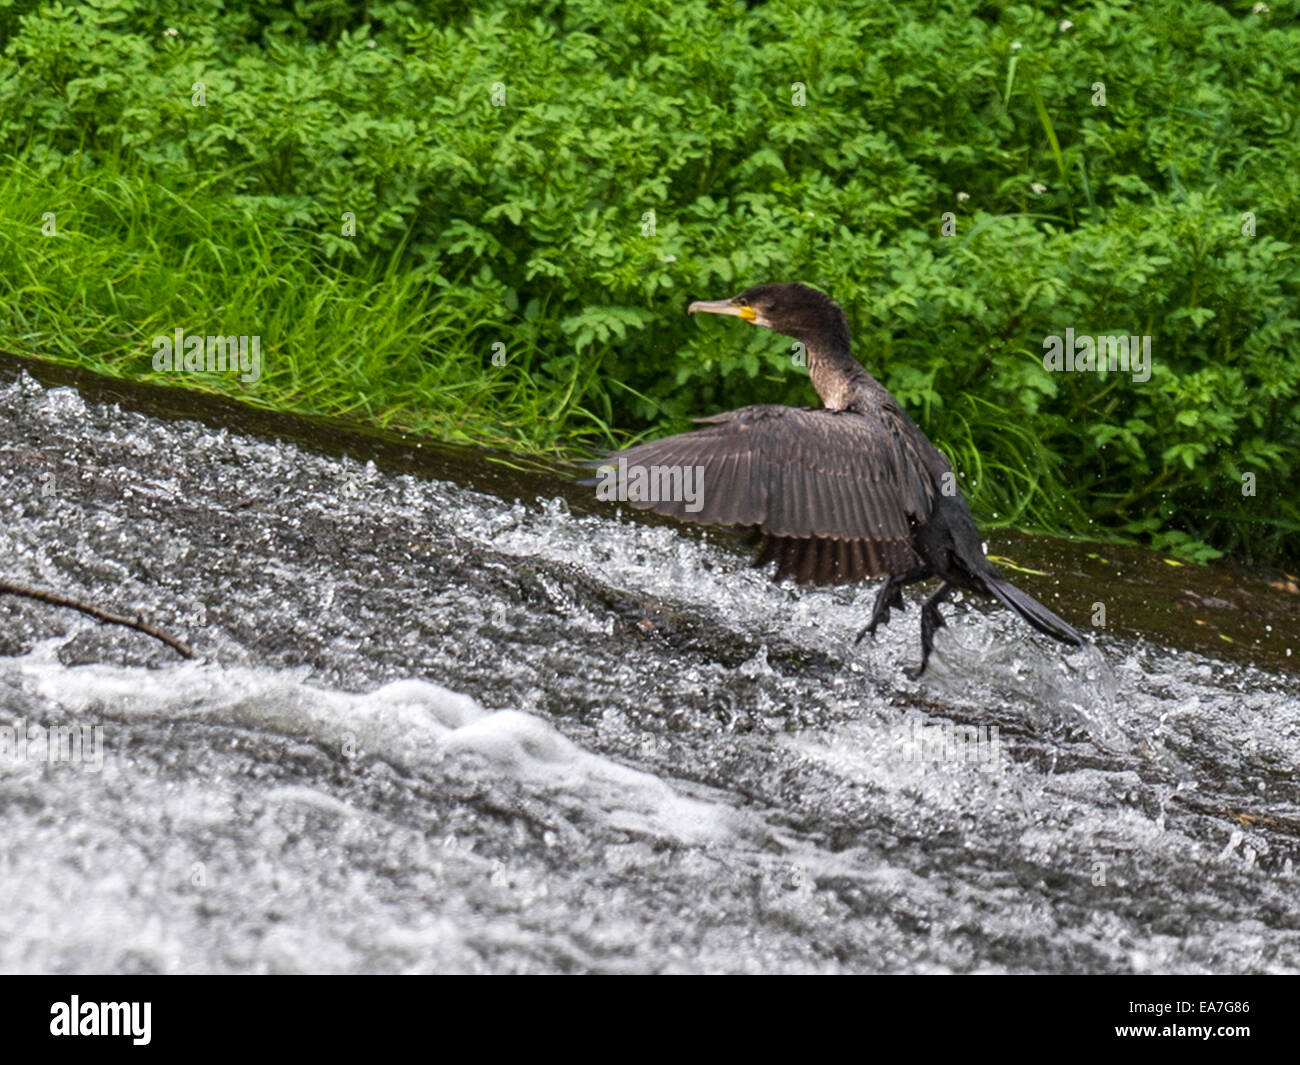 Wild Cormorant [Phalacrocoracidae] traverses the torrential weir waters near the river bank. Stock Photo